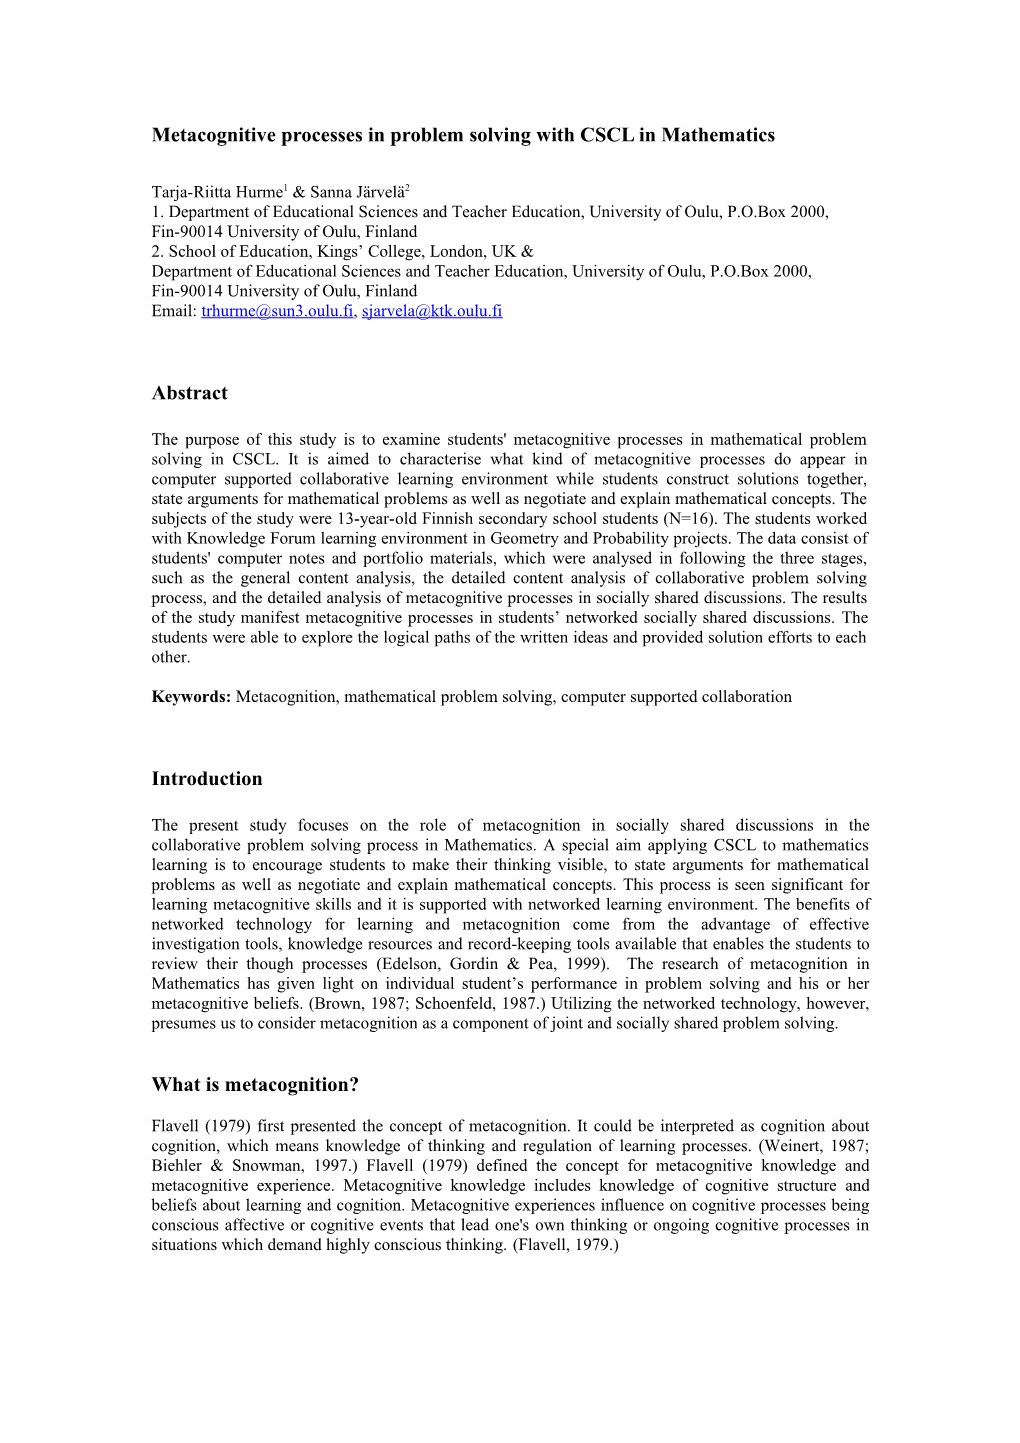 Eurocscl: Metacognition As a Break Impulse in Network-Based Mathematical Problem Solving